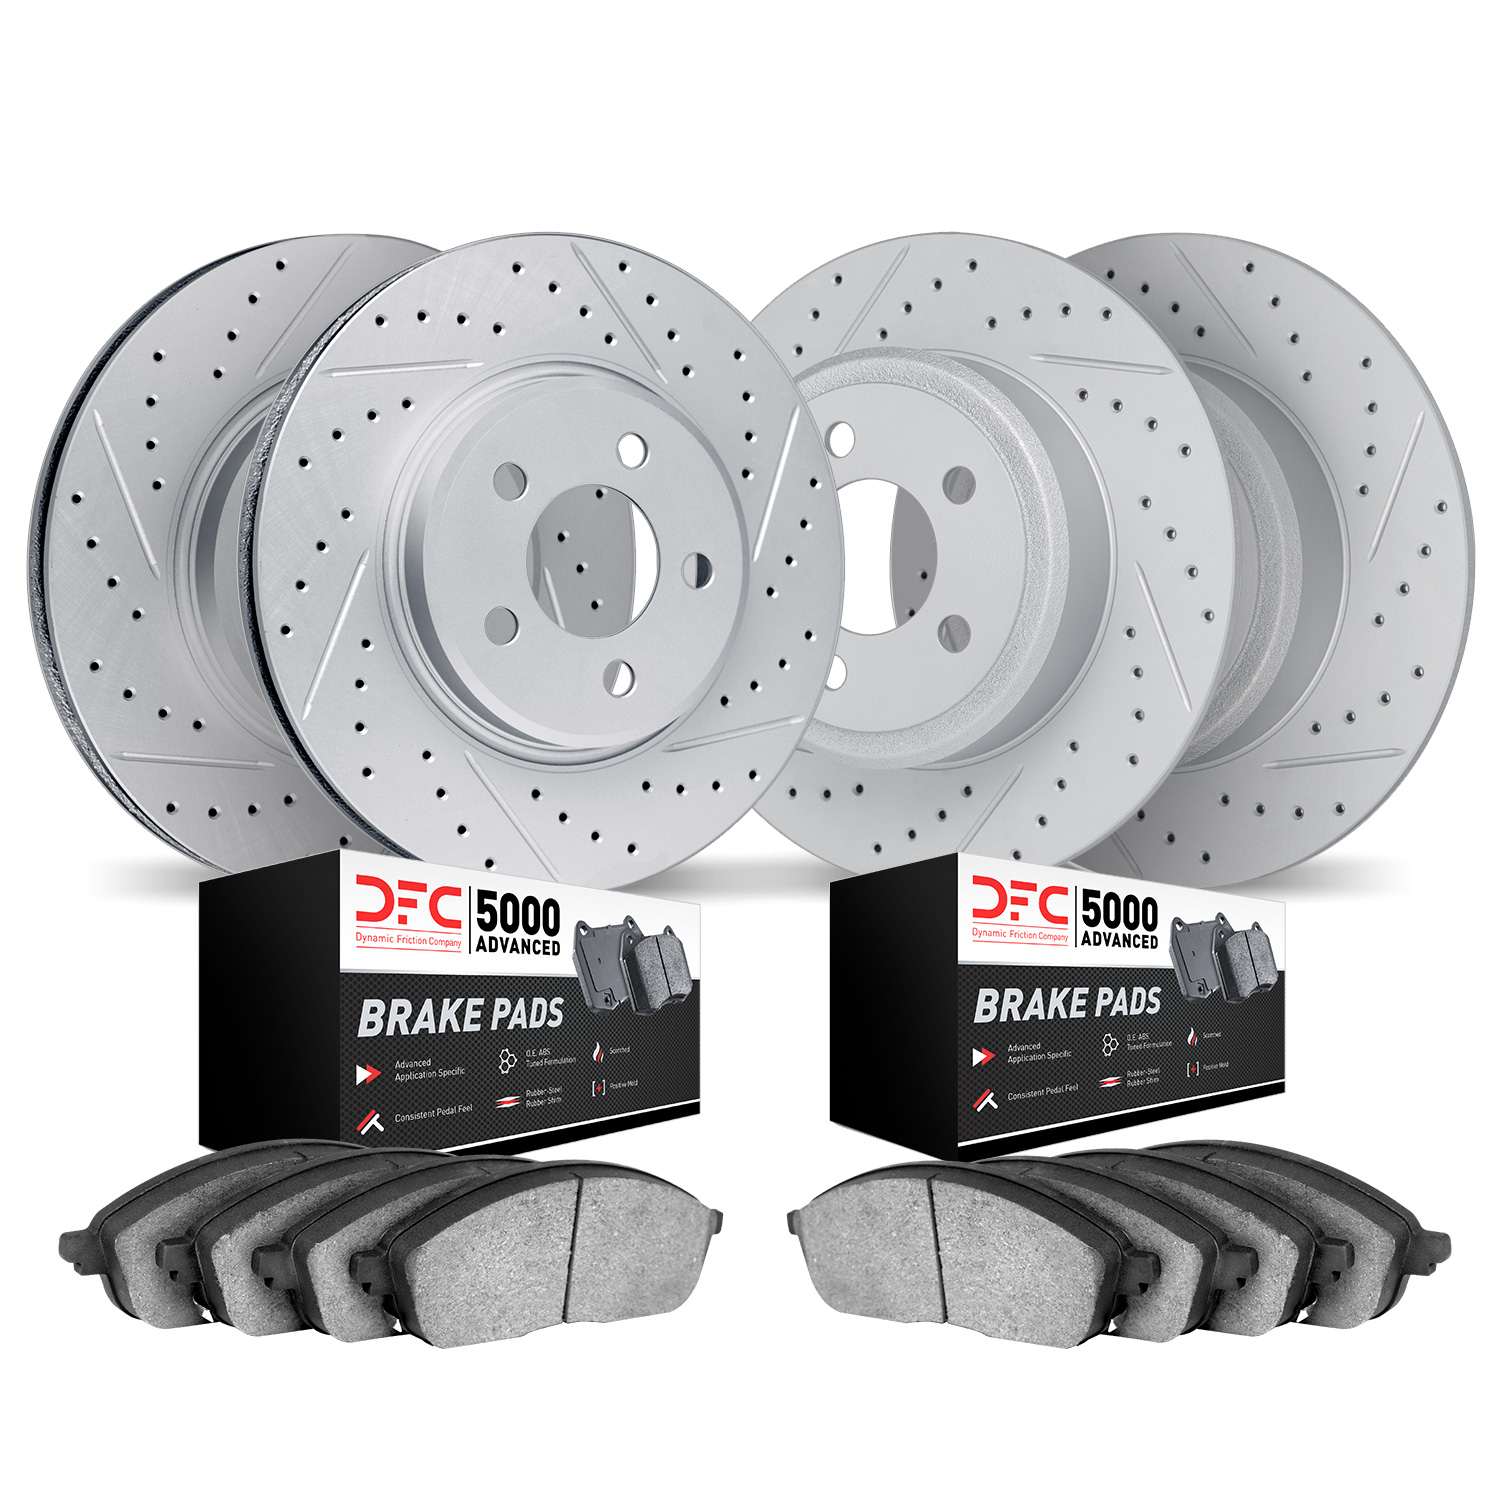 2504-56007 Geoperformance Drilled/Slotted Rotors w/5000 Advanced Brake Pads Kit, 1996-1997 Ford/Lincoln/Mercury/Mazda, Position: